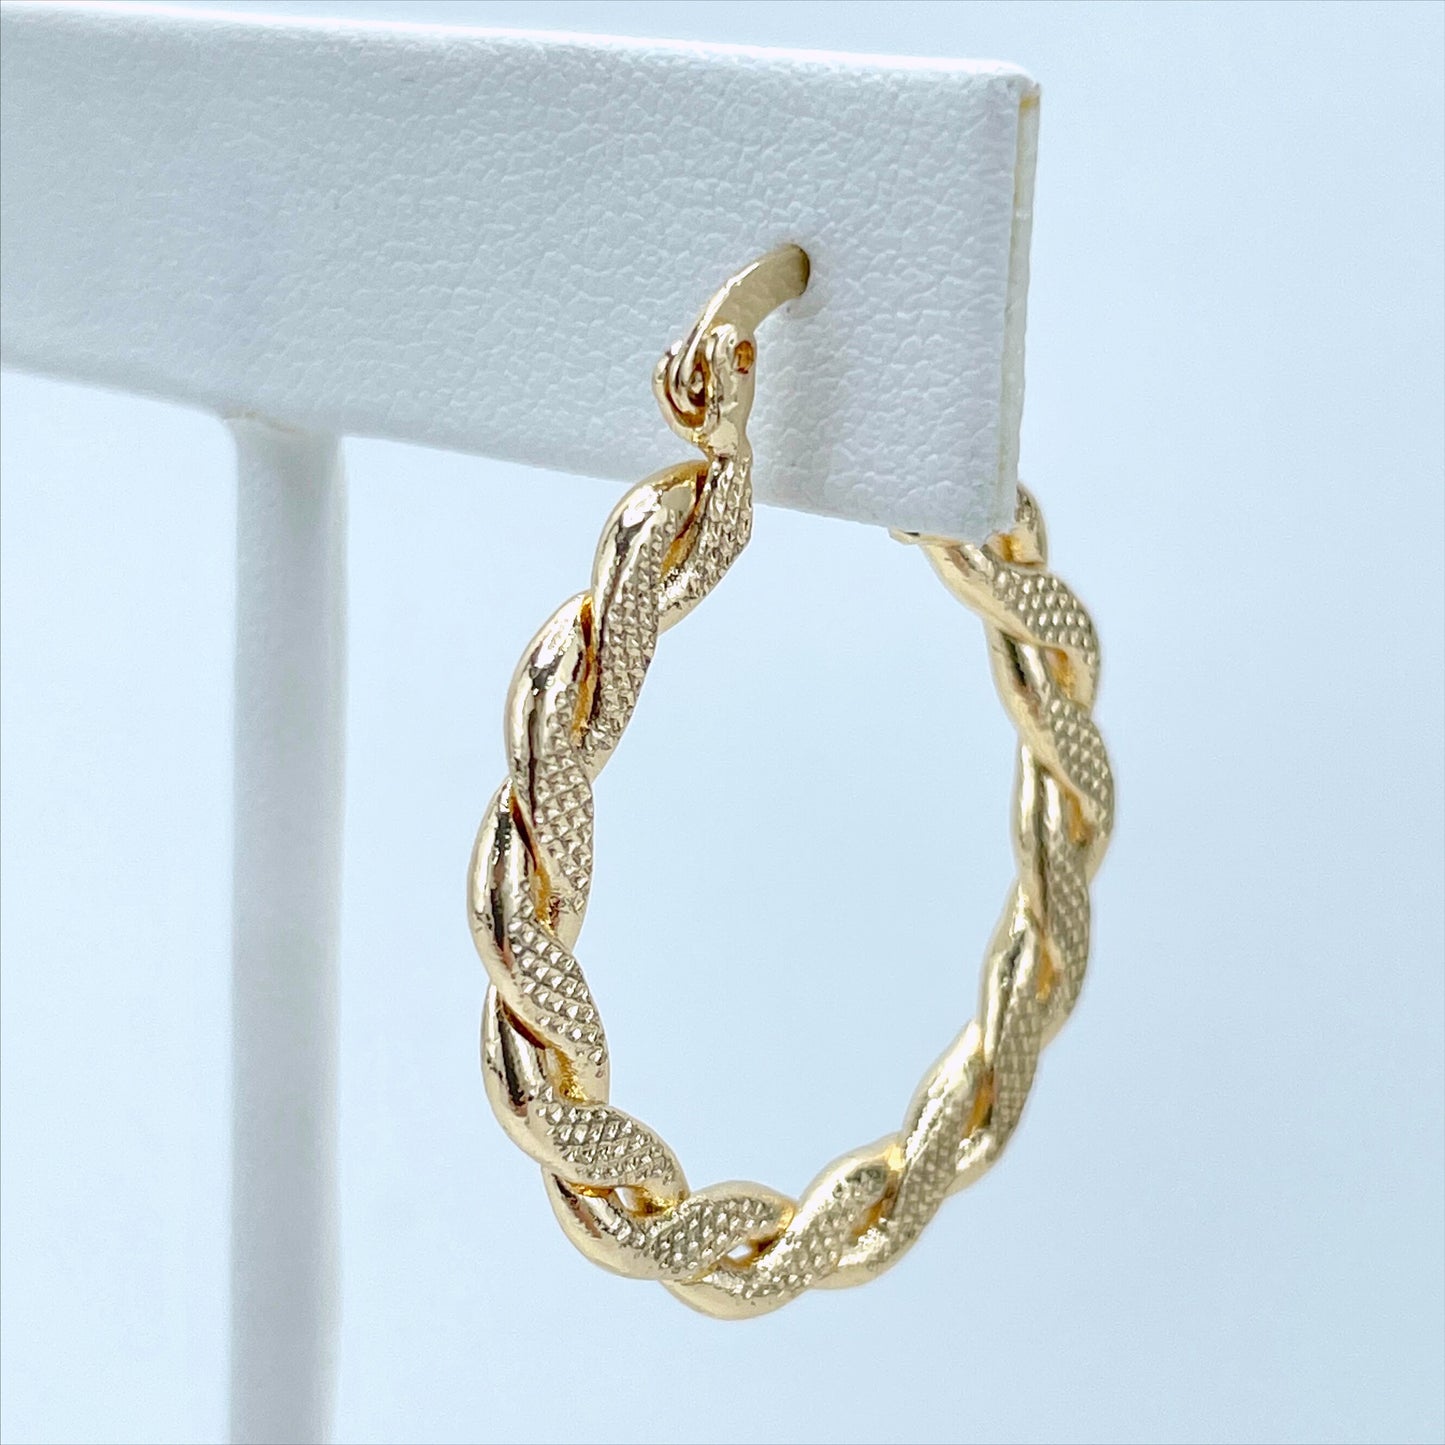 18k Gold Filled Braided 30mm Hoop Textured Earrings, 2mm Thickness, Wholesale Jewelry Making Supplies